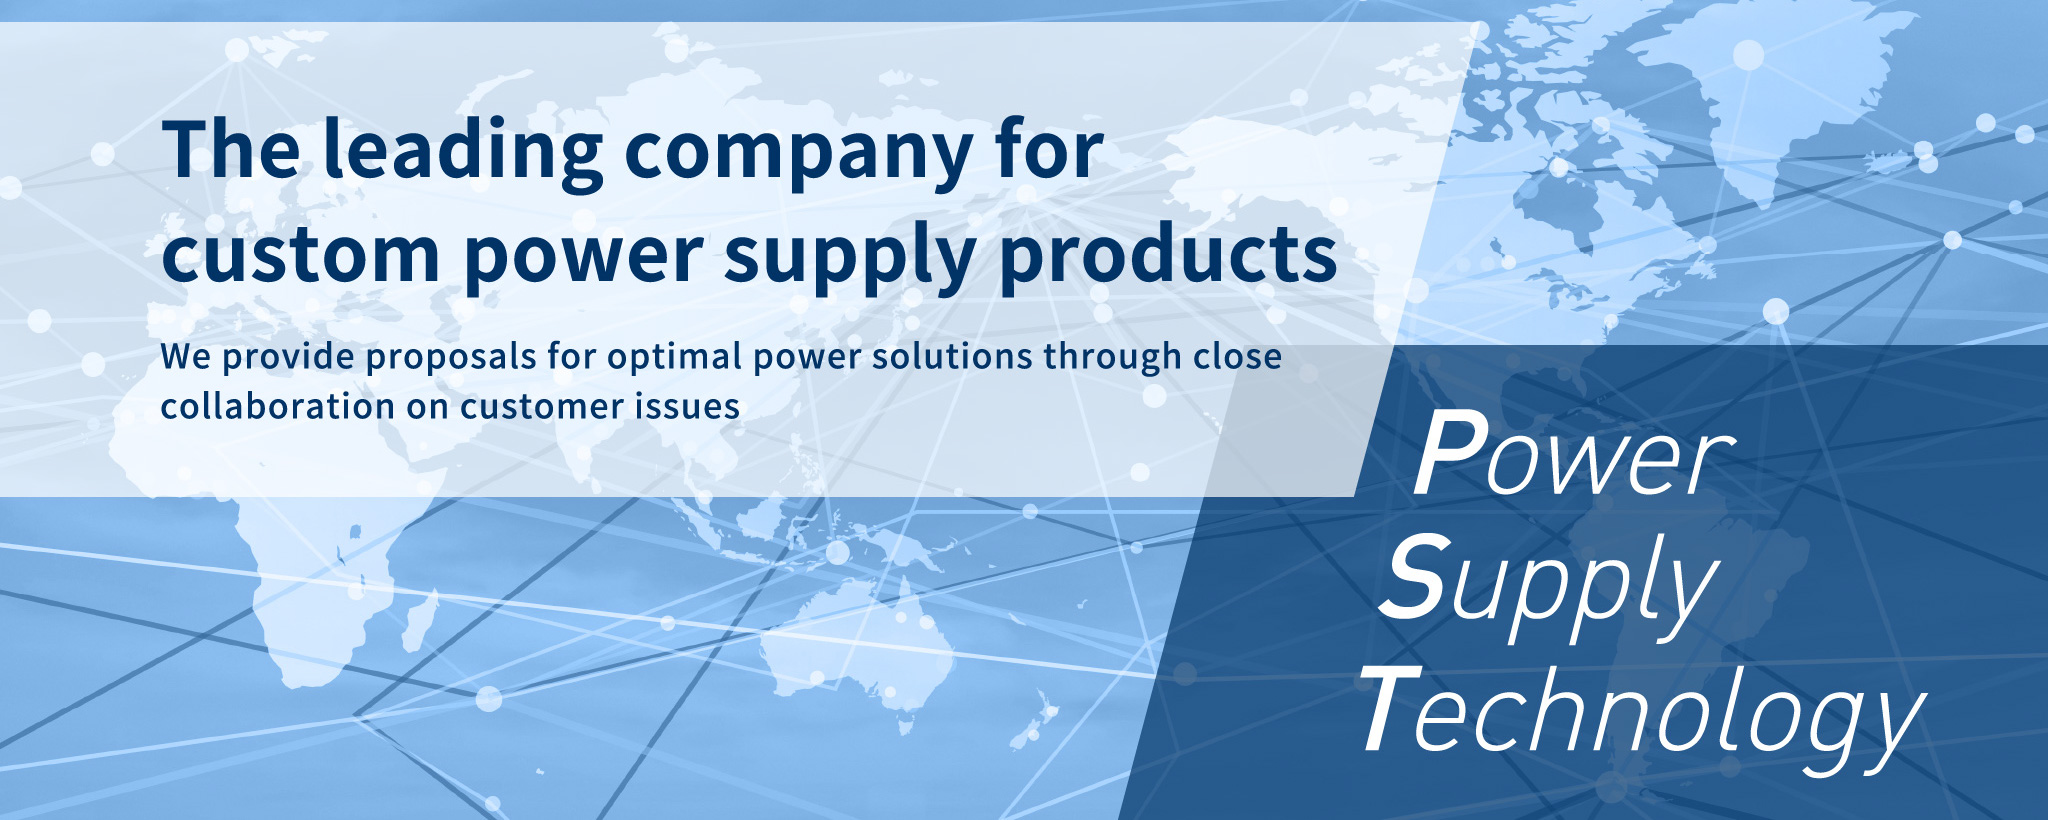 The leading company for custom power supply products We provide proposals for optimal power solutions through close collaboration on customer issues